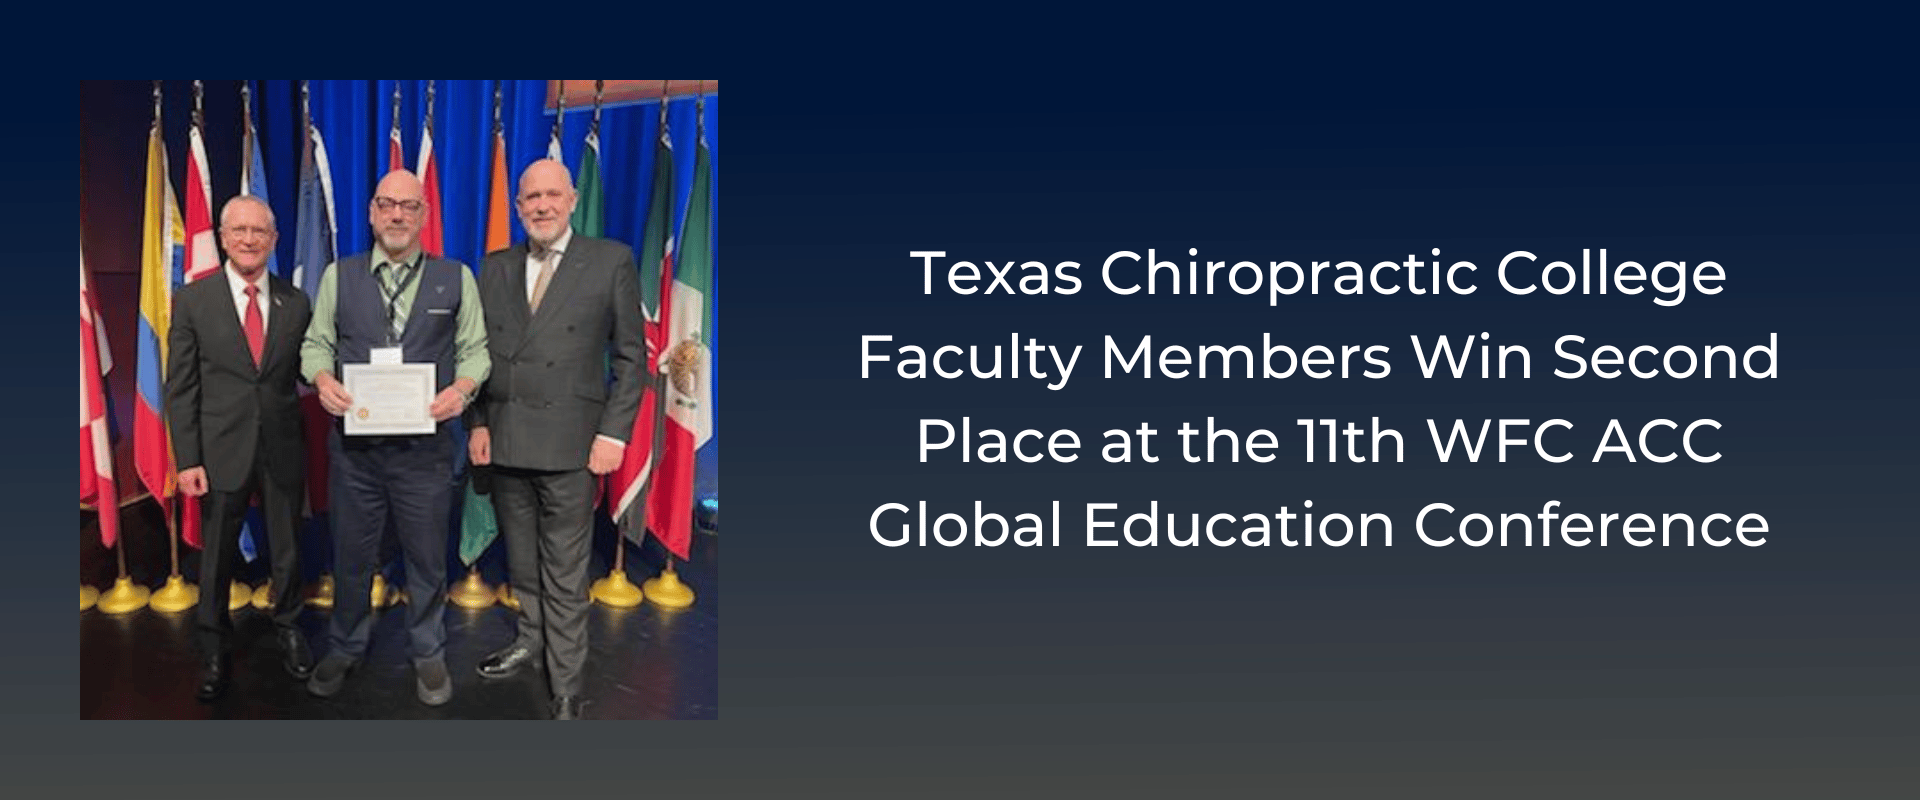 Texas Chiropractic College Faculty Members Win Second Place at the 11th